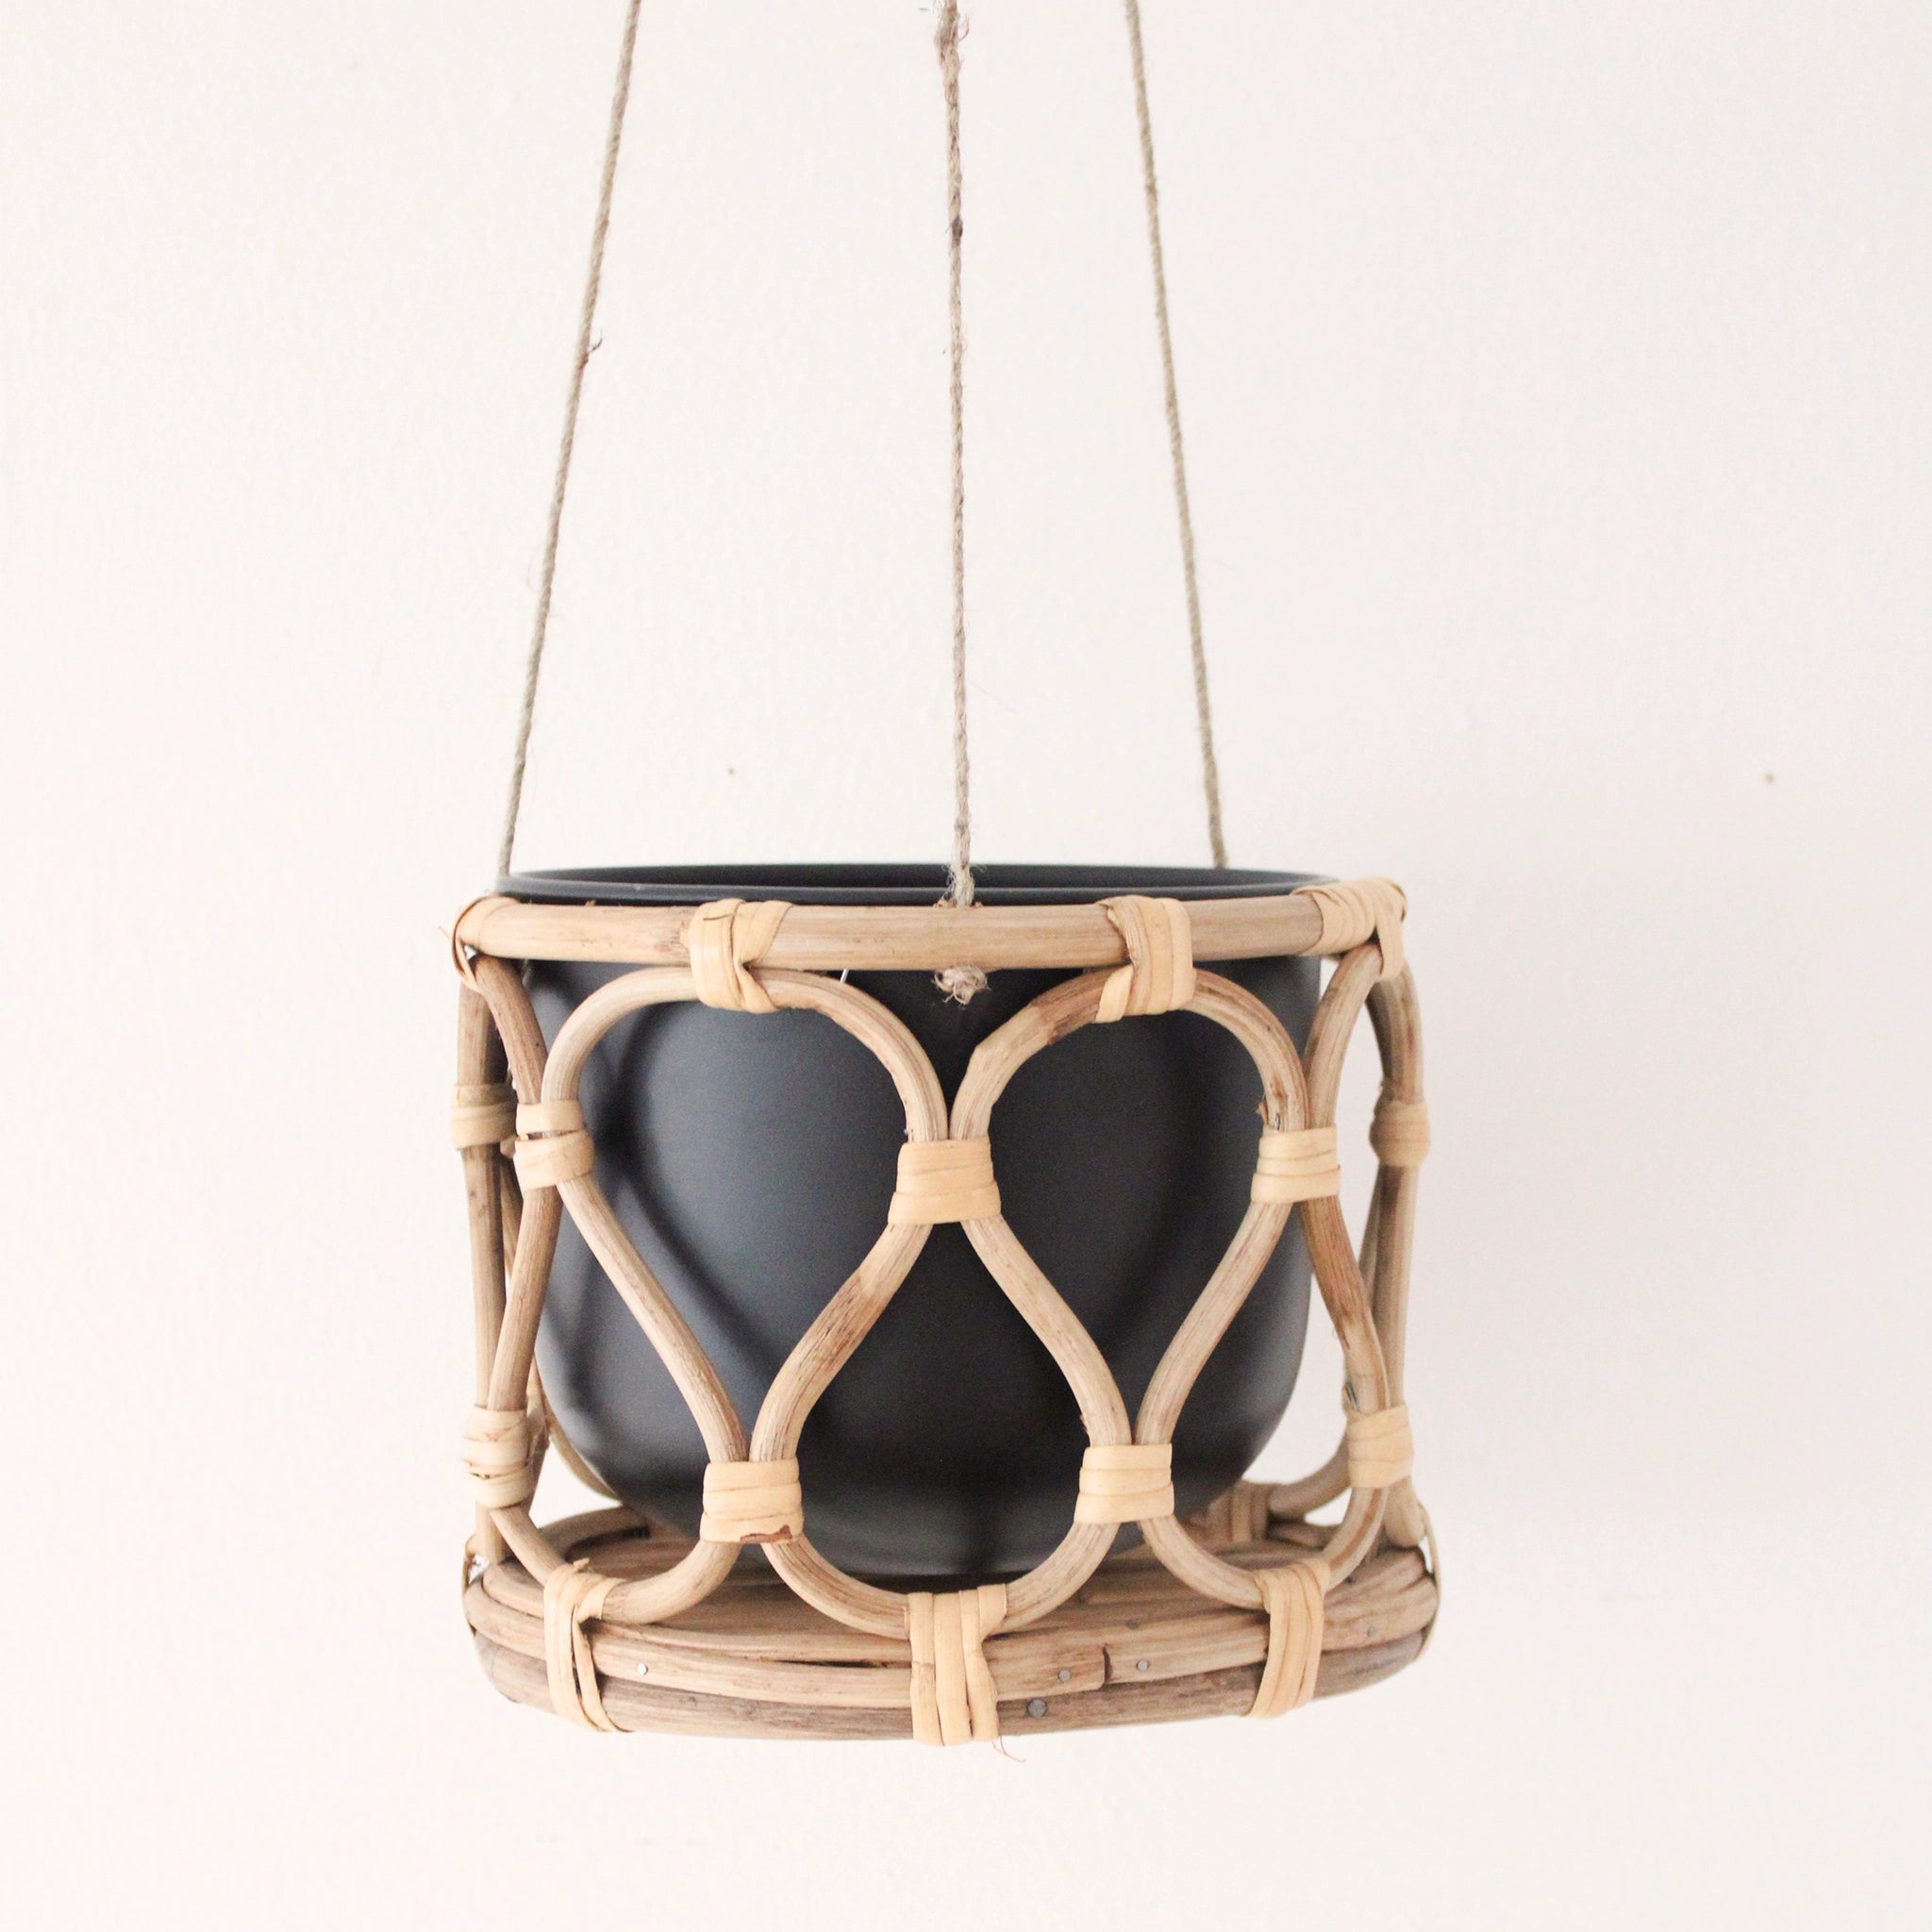 A hanging rattan planter with a black insert pot hanging in front of a white background. The rattan is bent into a rounded lattice pattern. Planter is hanging from 3 twine ropes that run off the edge of the photo.